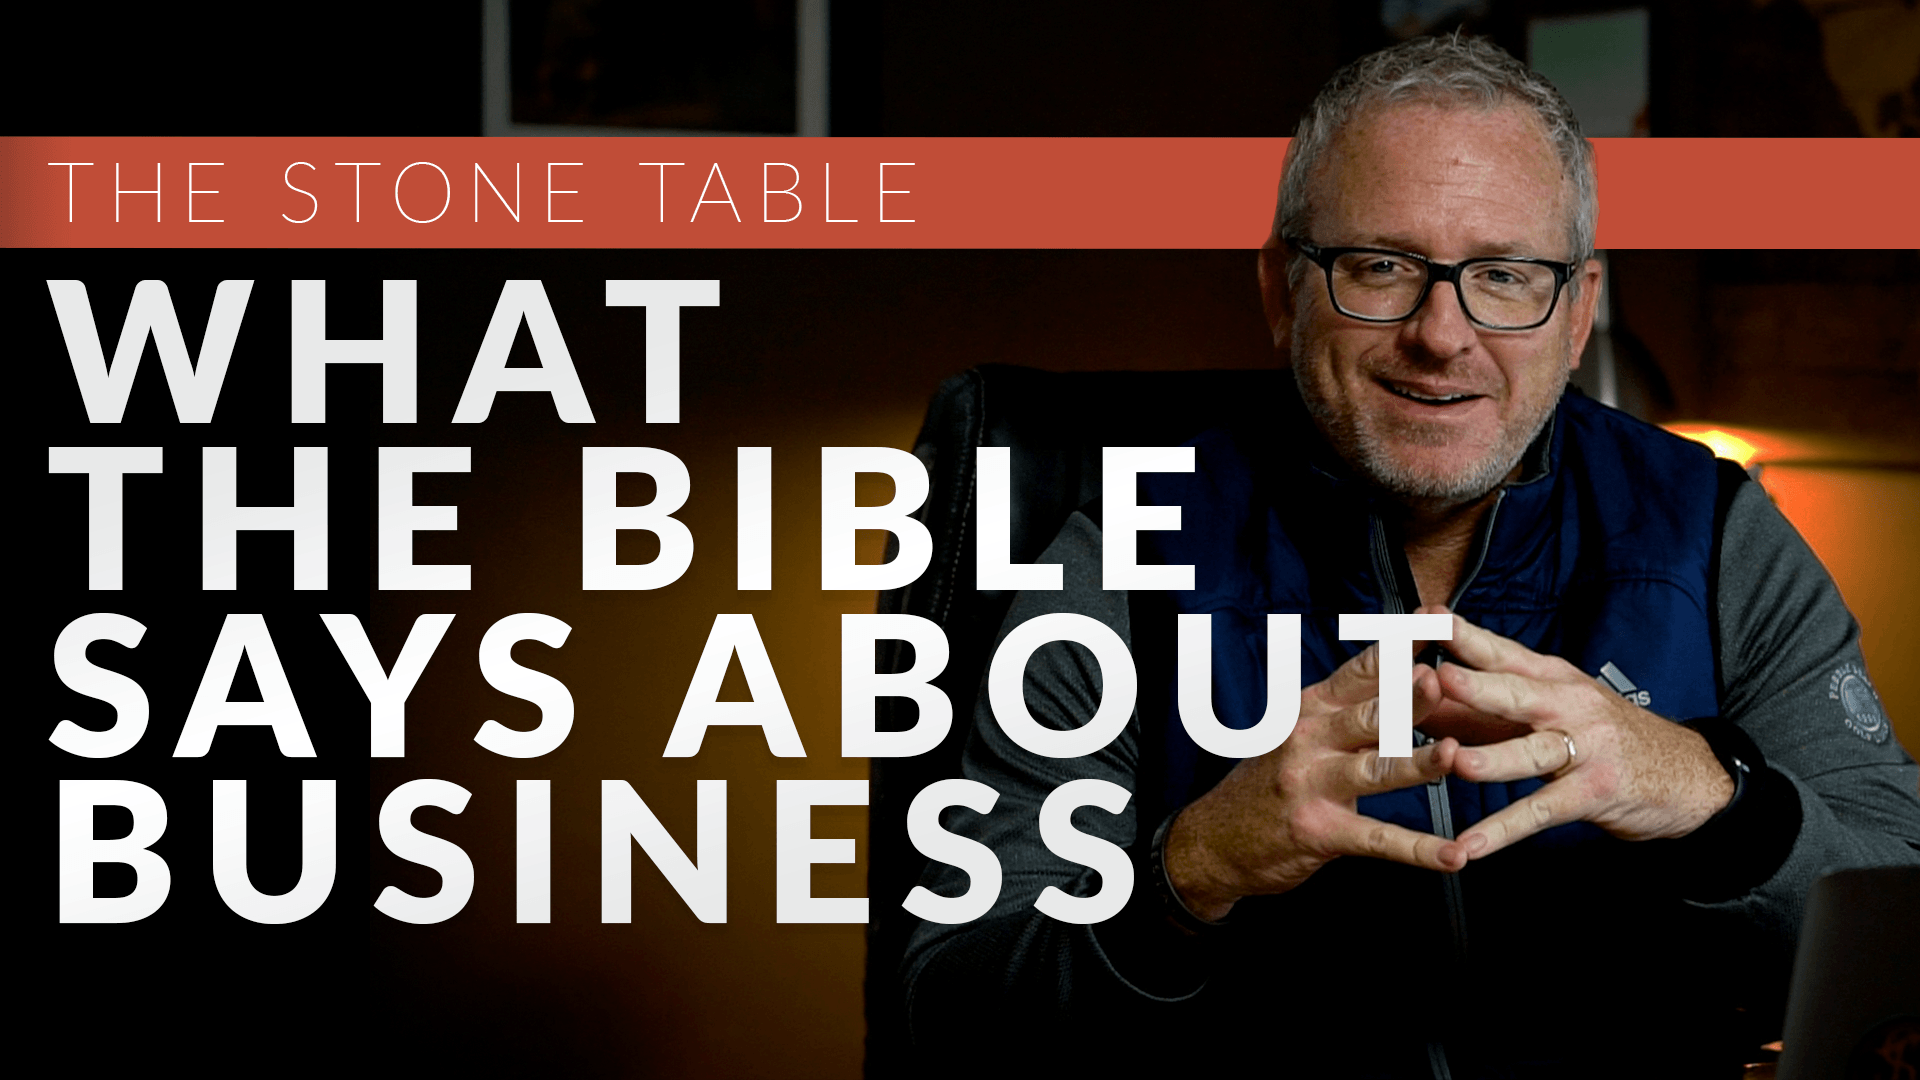 VIDEO: What The Bible Says About Business